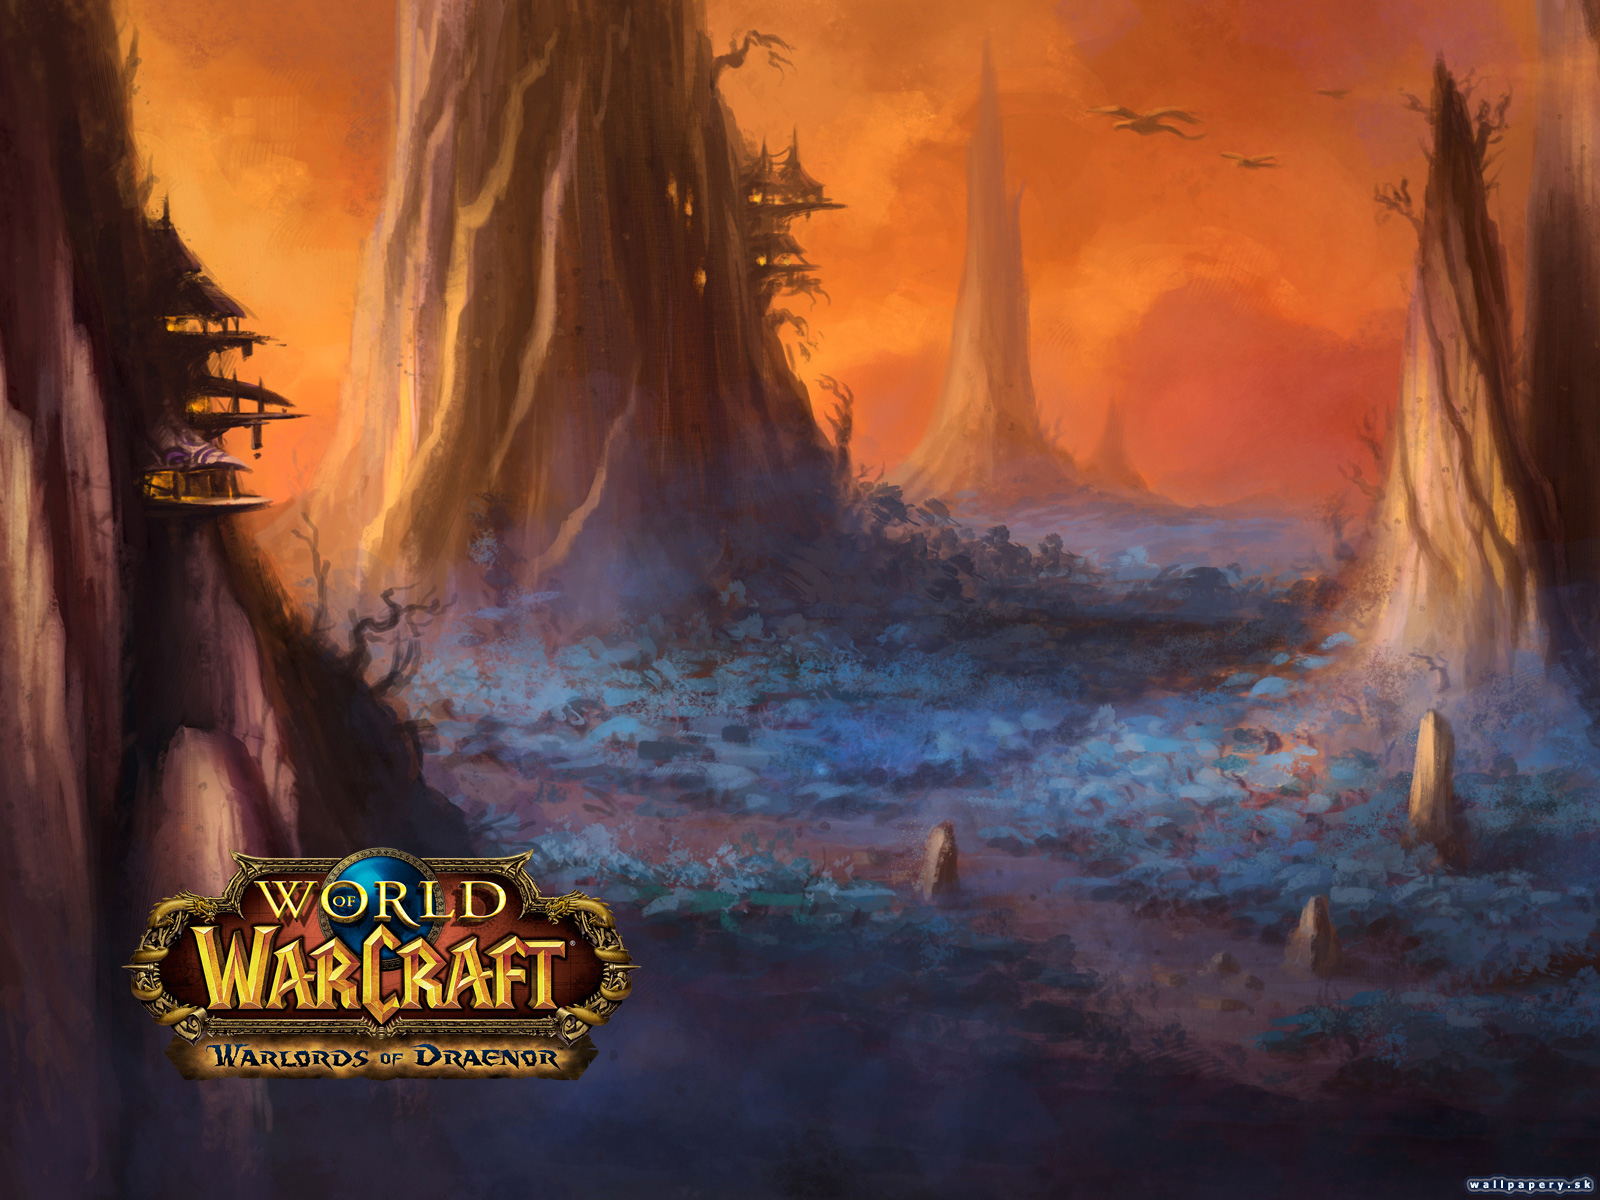 World of Warcraft: Warlords of Draenor - wallpaper 2